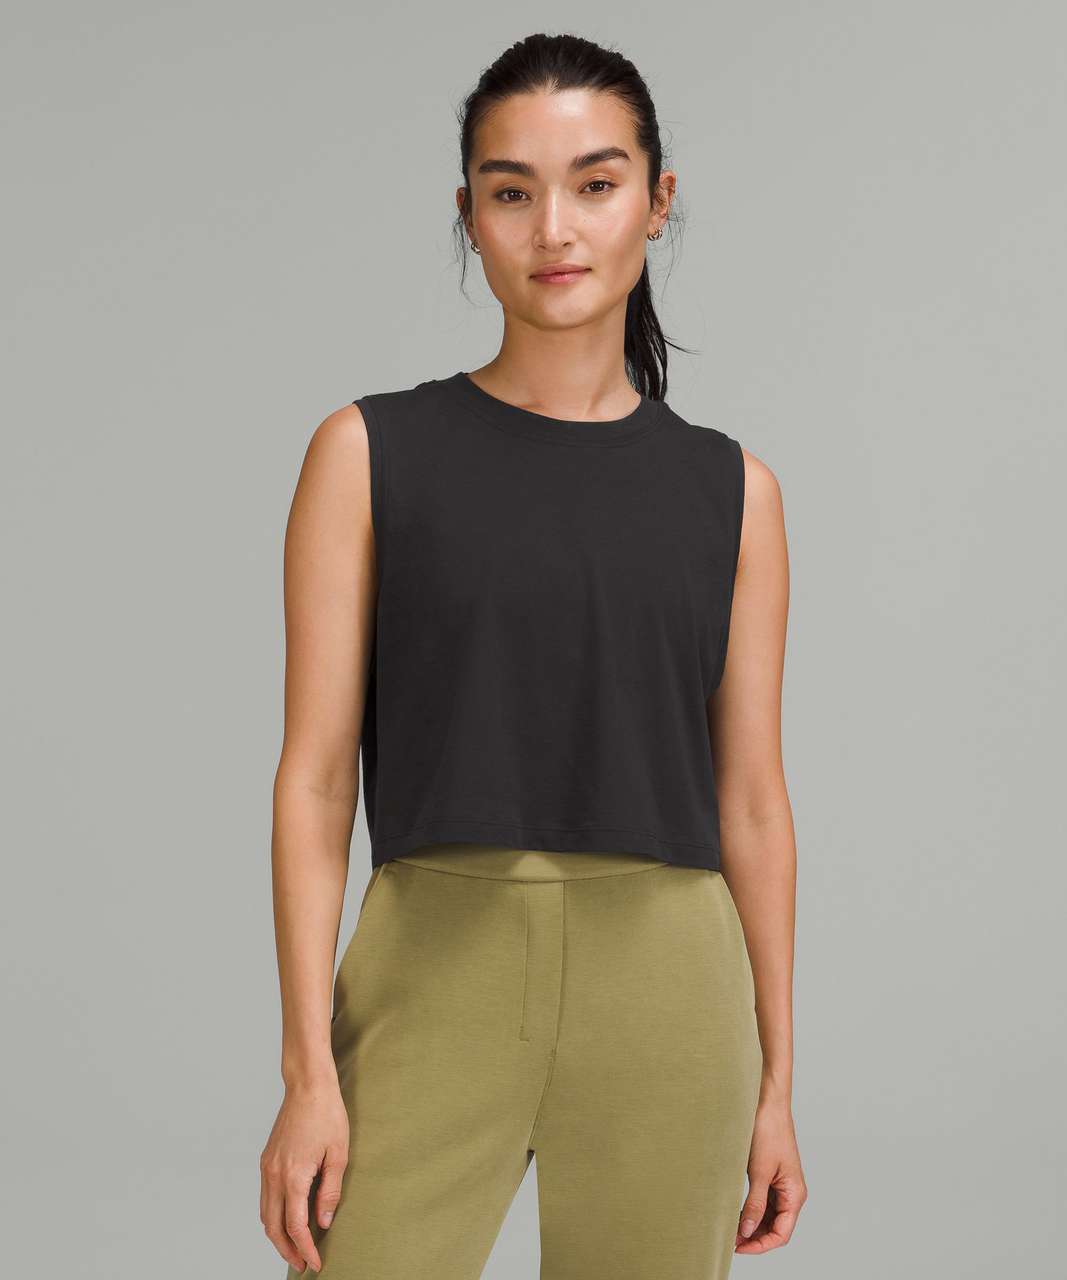 Lululemon All Yours Cropped Cotton Tank Top - Black